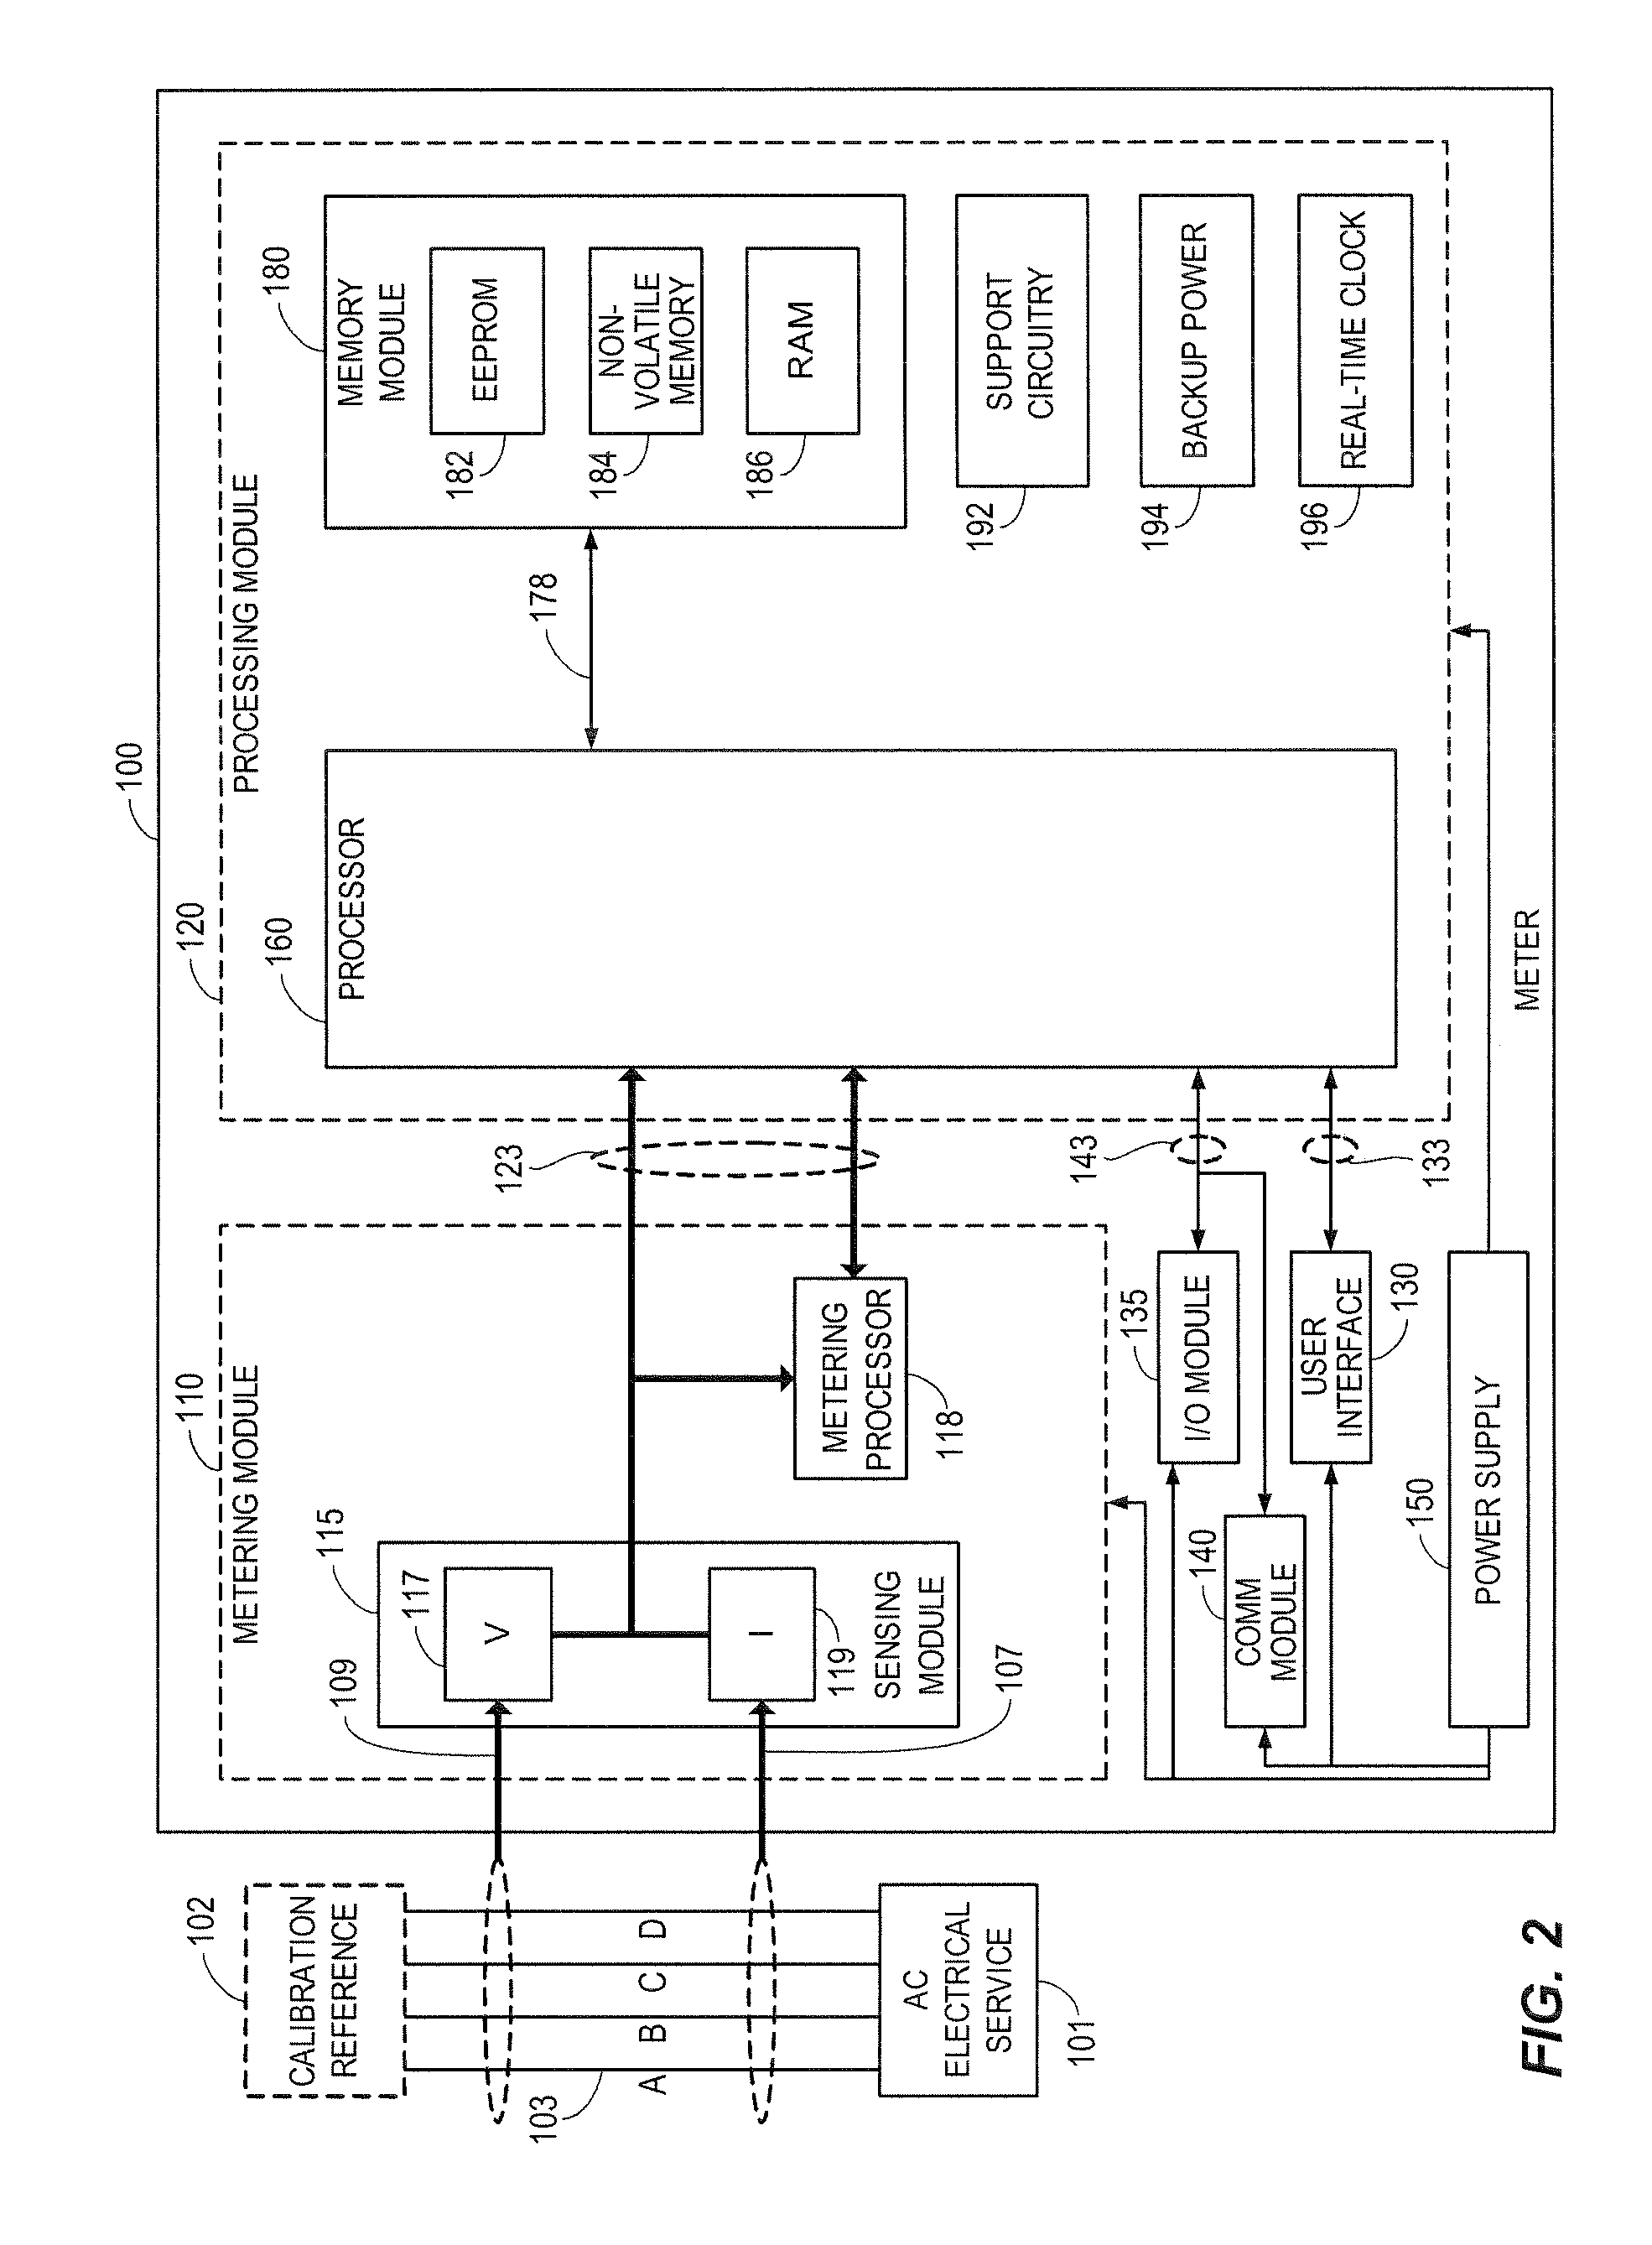 Intelligent Electronic Device with Board-Range High Accuracy